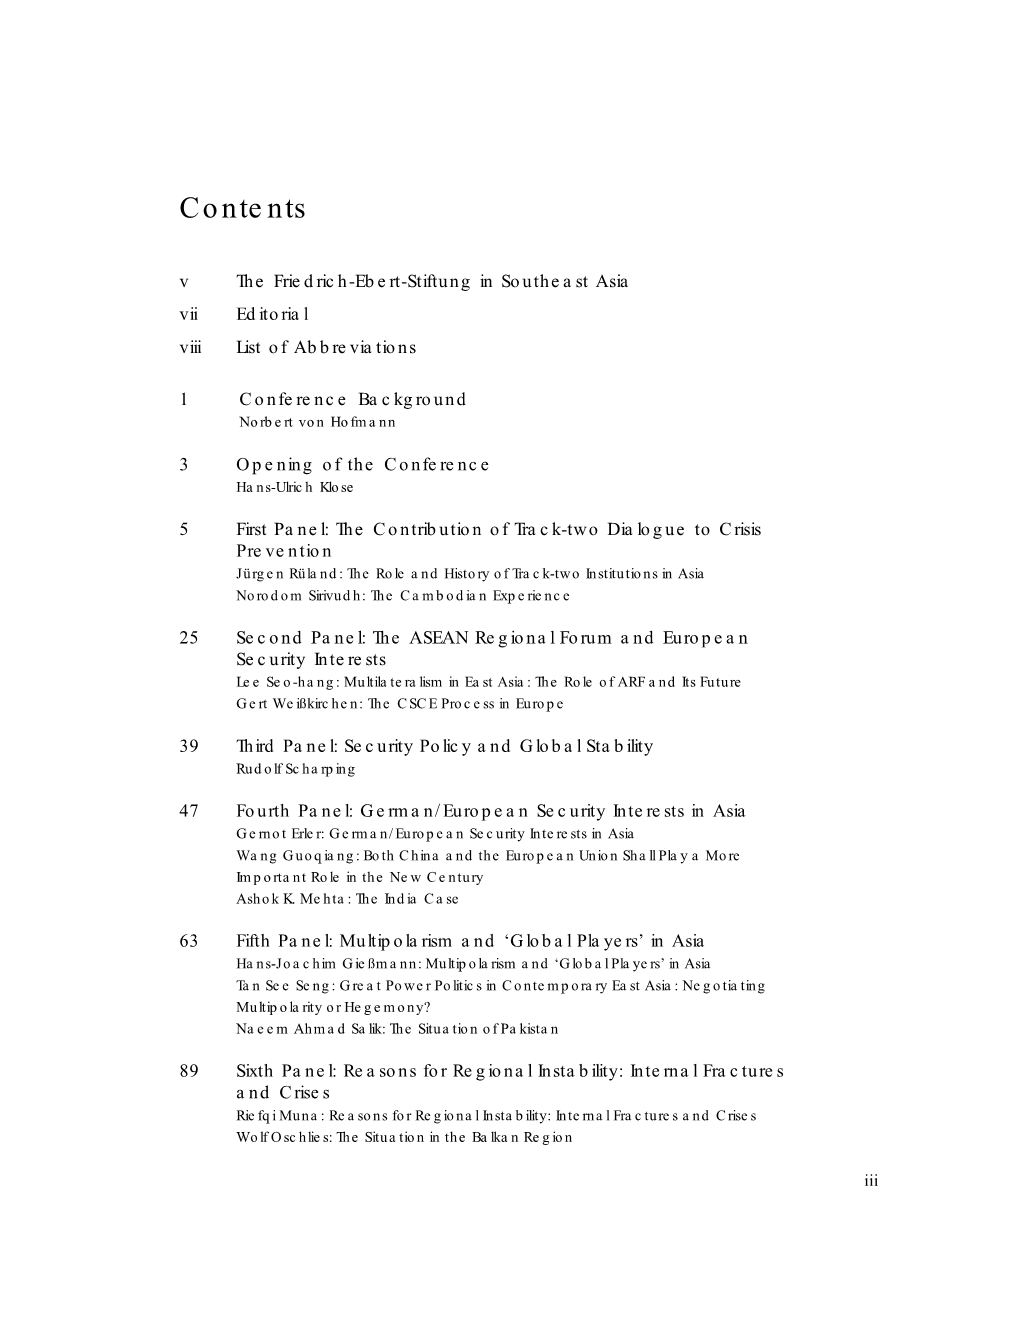 Contents V the Friedrich-Ebert-Stiftung in Southeast Asia Vii Editorial Viii List of Abbreviations